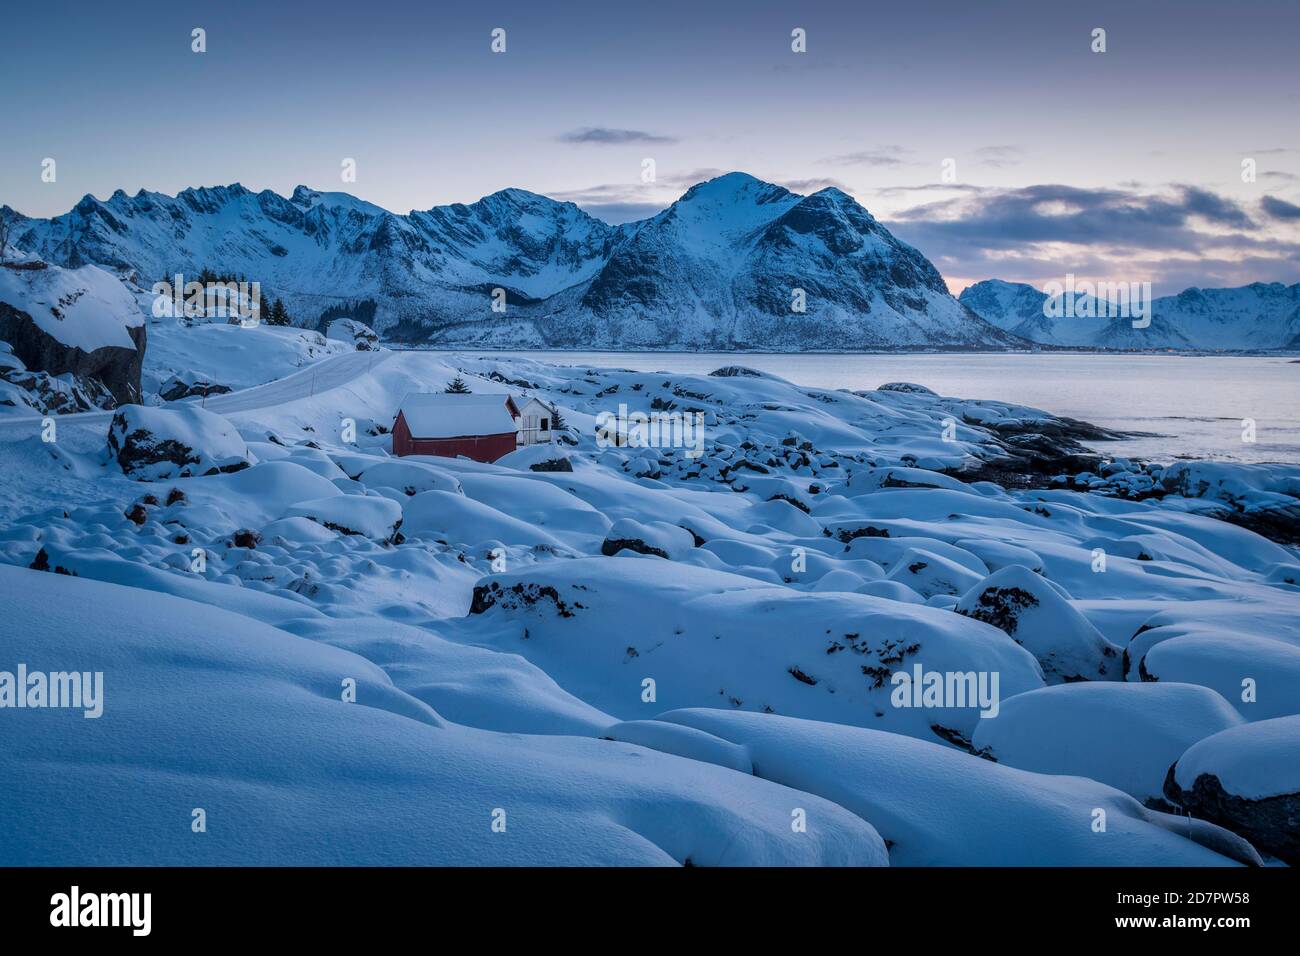 Snowy winter landscape by the sea, wooden cabin on the coast, mountains in the back, Nordland, Lofoten, Norway Stock Photo